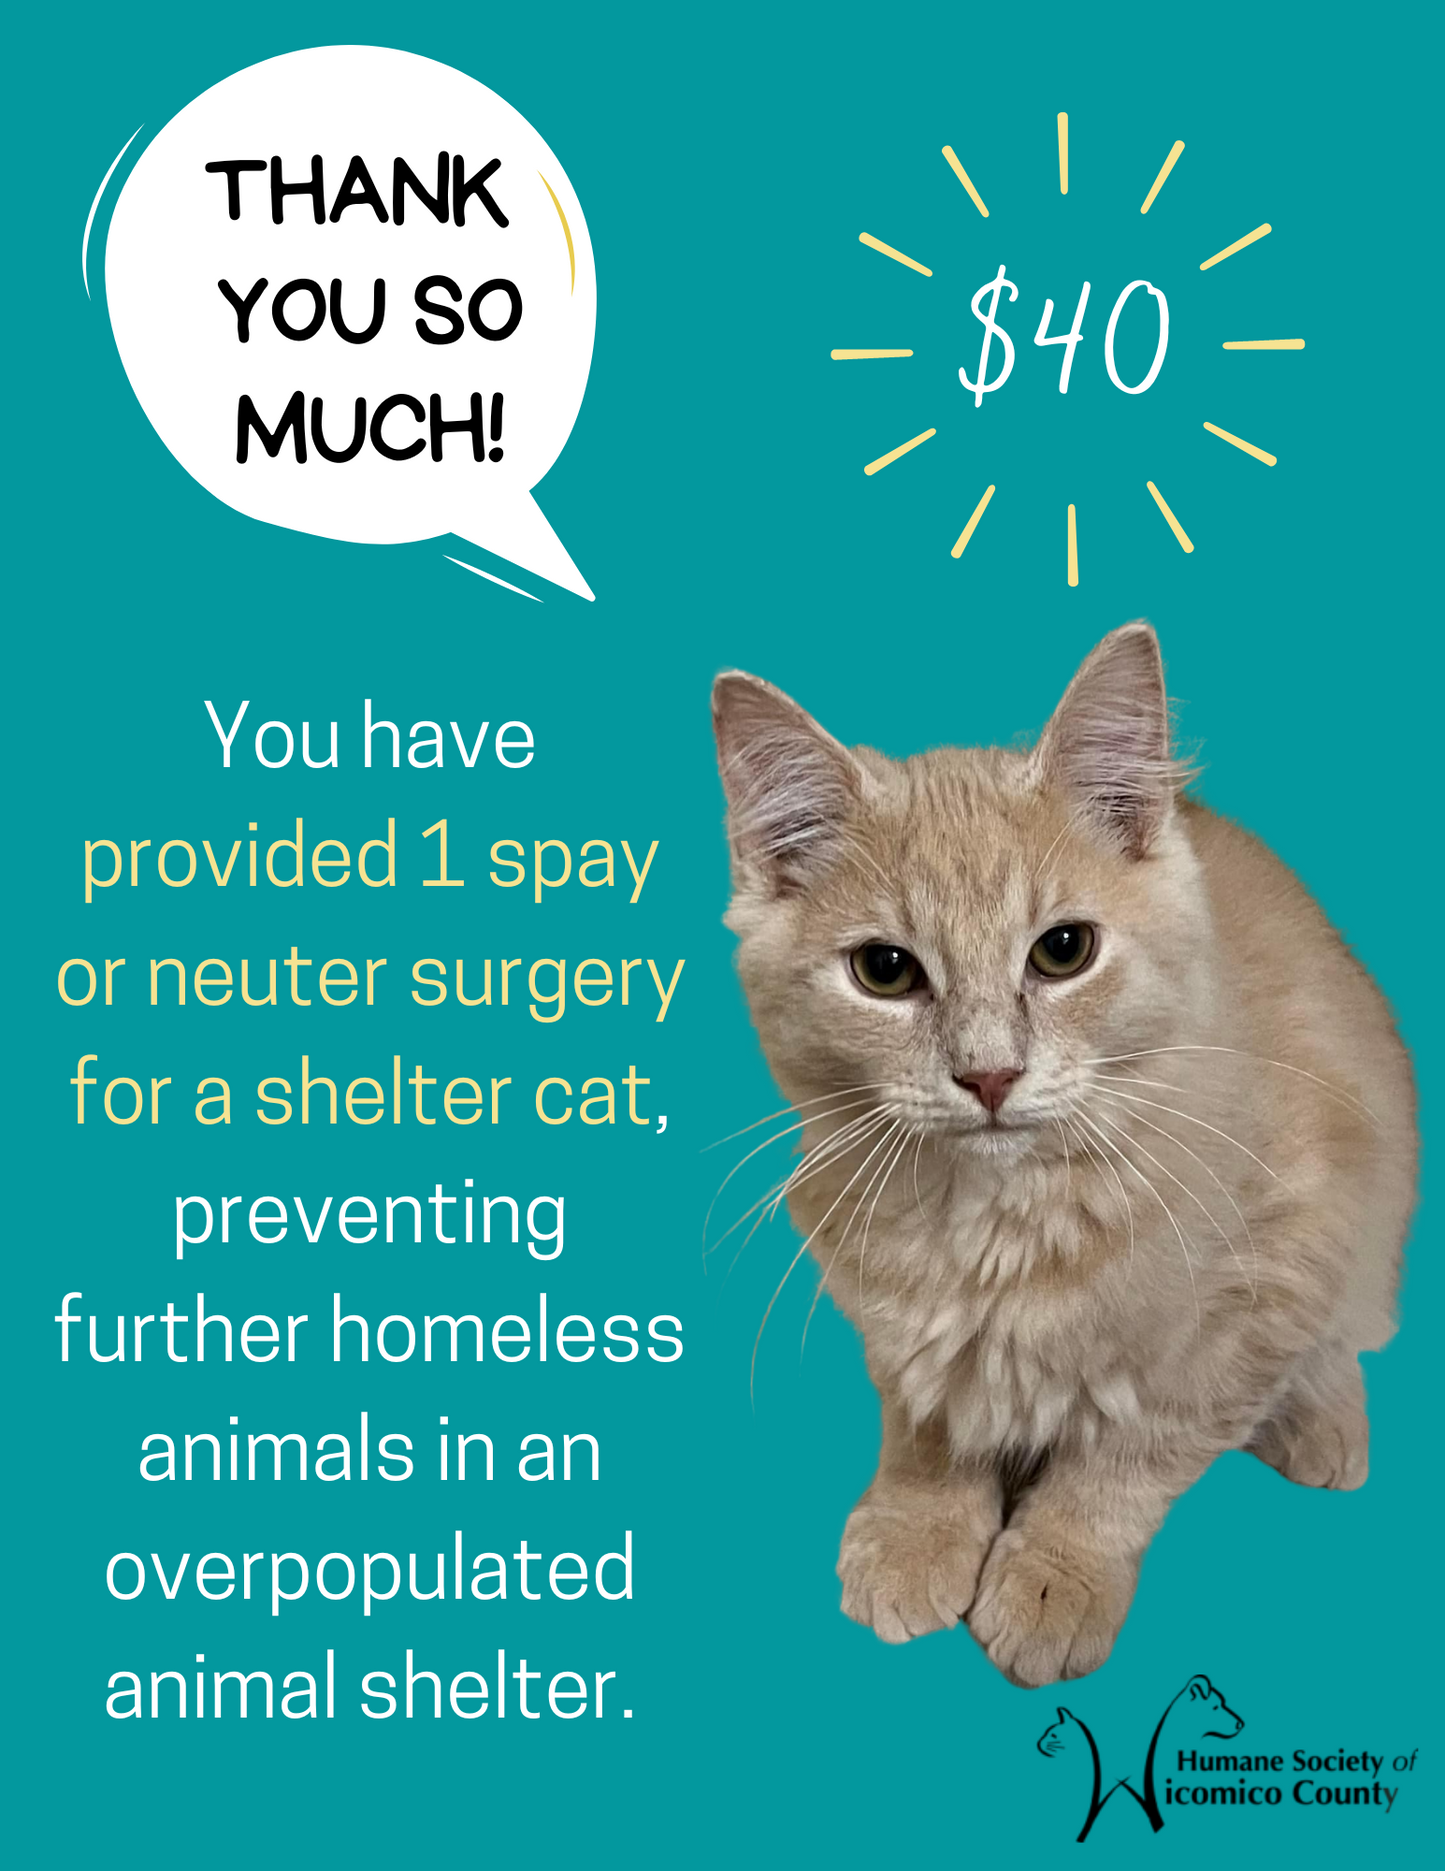 1 Spay or Neuter Surgery for a Shelter Cat - $40